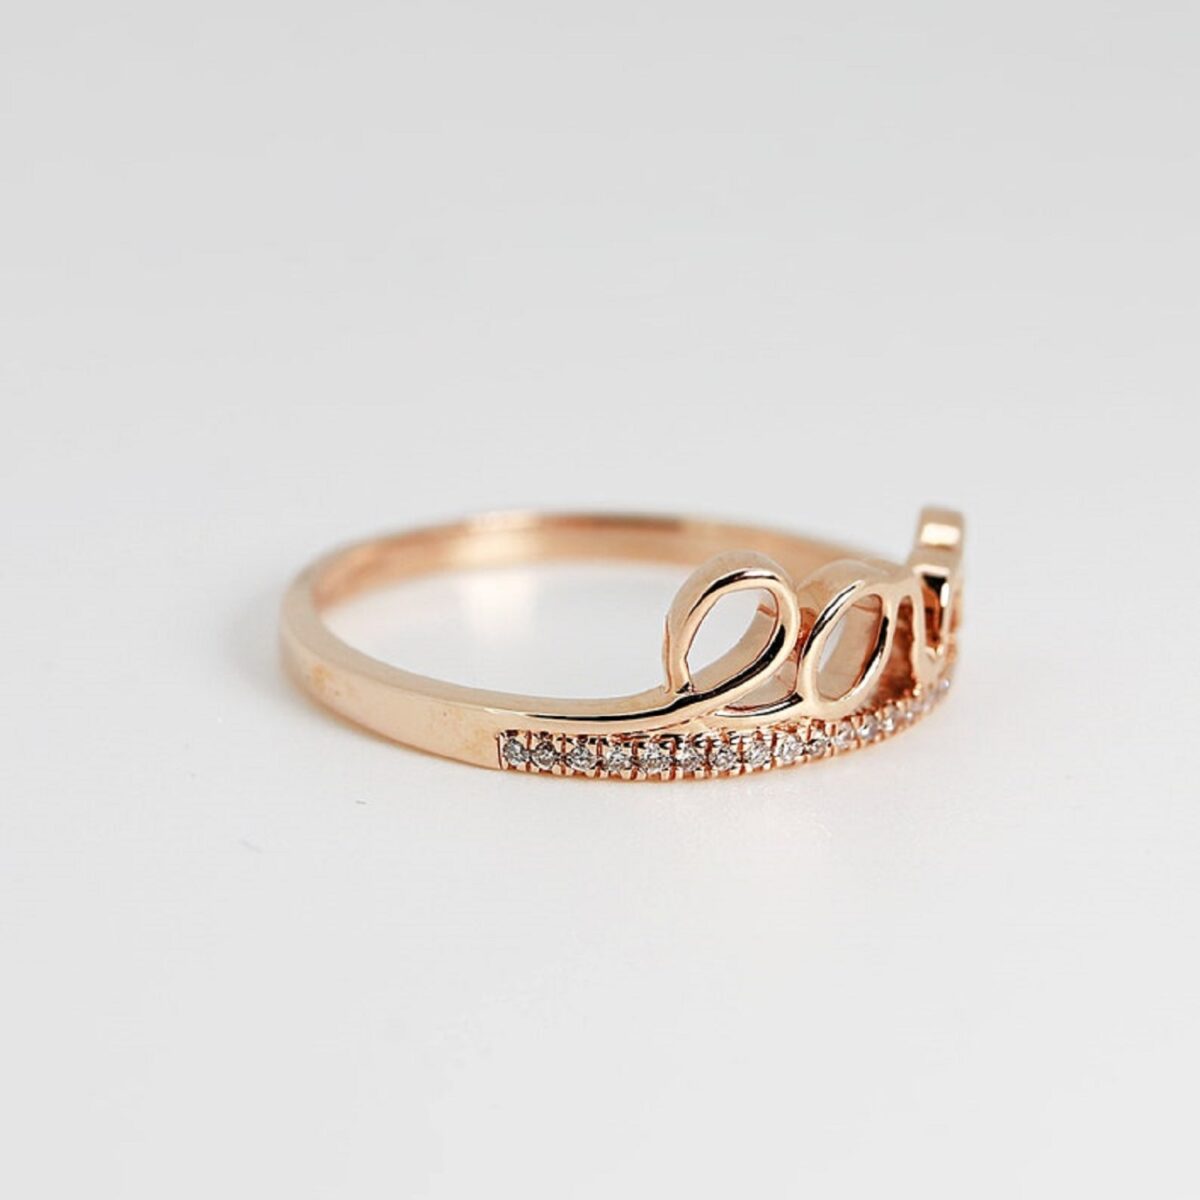 "Love" write lab grown diamond statement ring crafted in 14k rose gold